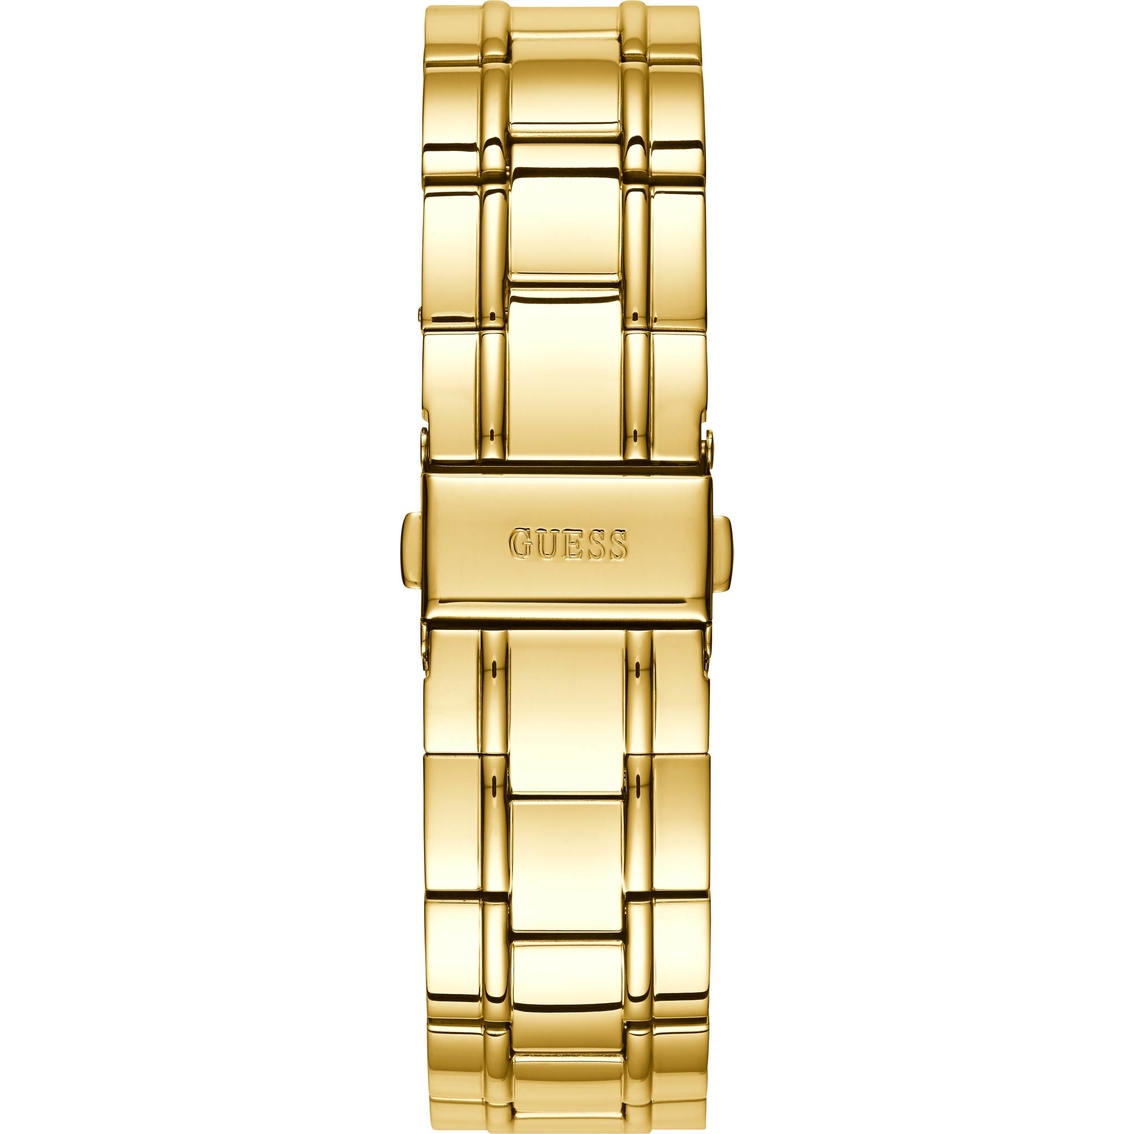 GUESS LADIES GOLD TONE CASE GOLD TONE STAINLESS STEEL WATCH U1097L2 - image 4 of 4